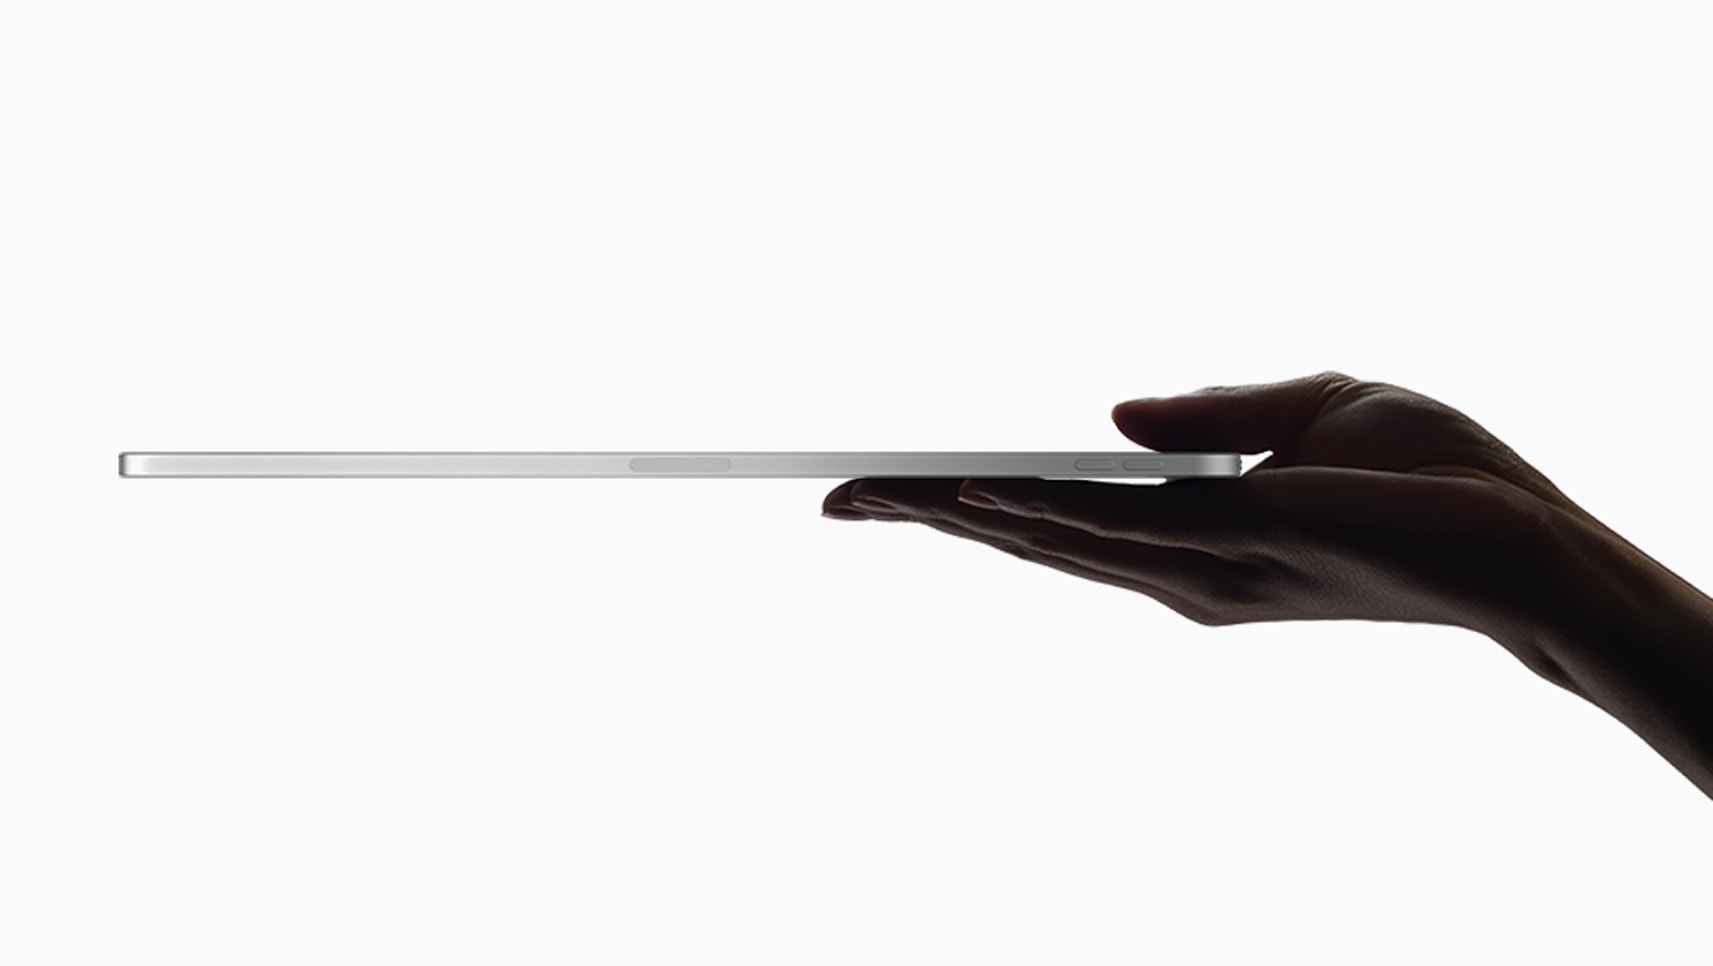 The new 2018 iPad Pro is Apple's thinnest tablet yet.